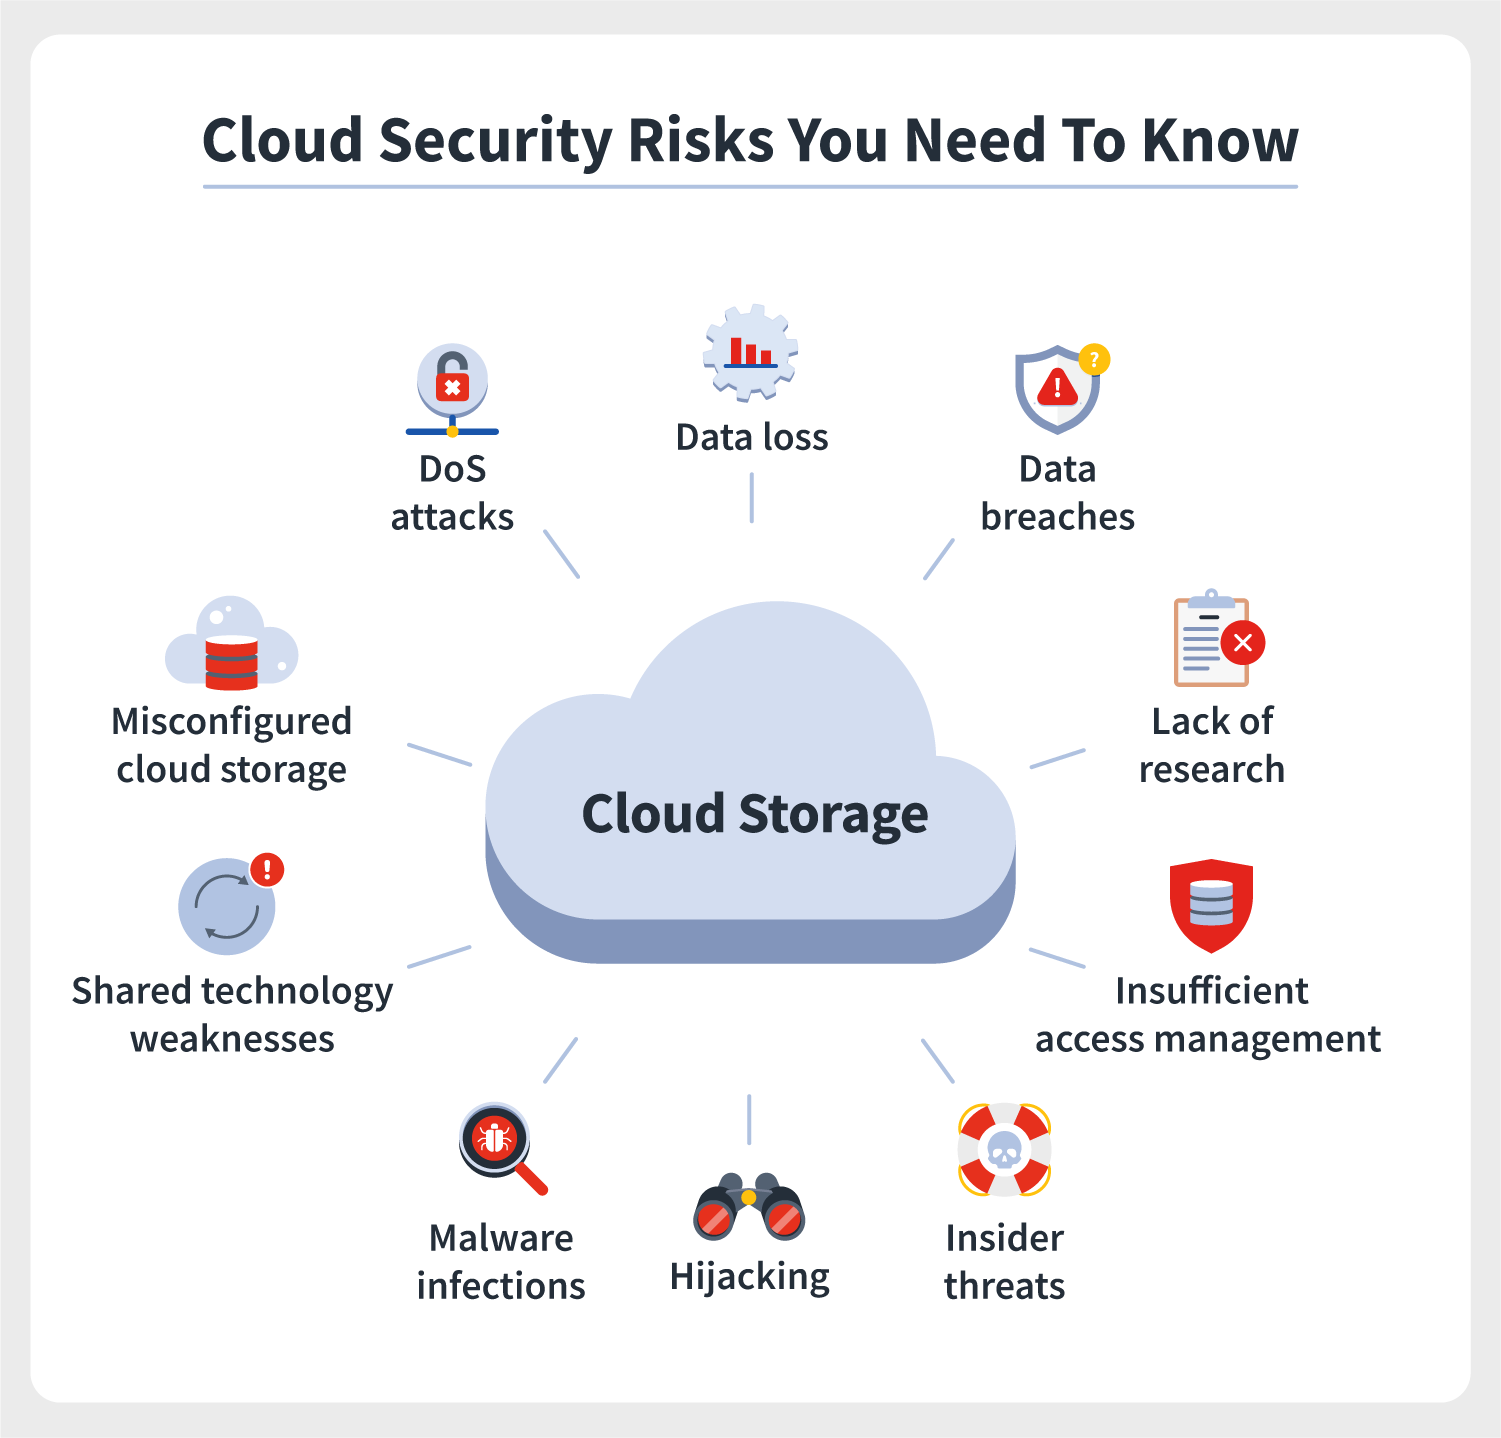 Figure 1 cloud security risk you need to know Figure 1 cloud security risk you need to know Figure 1 cloud security risk you need to know